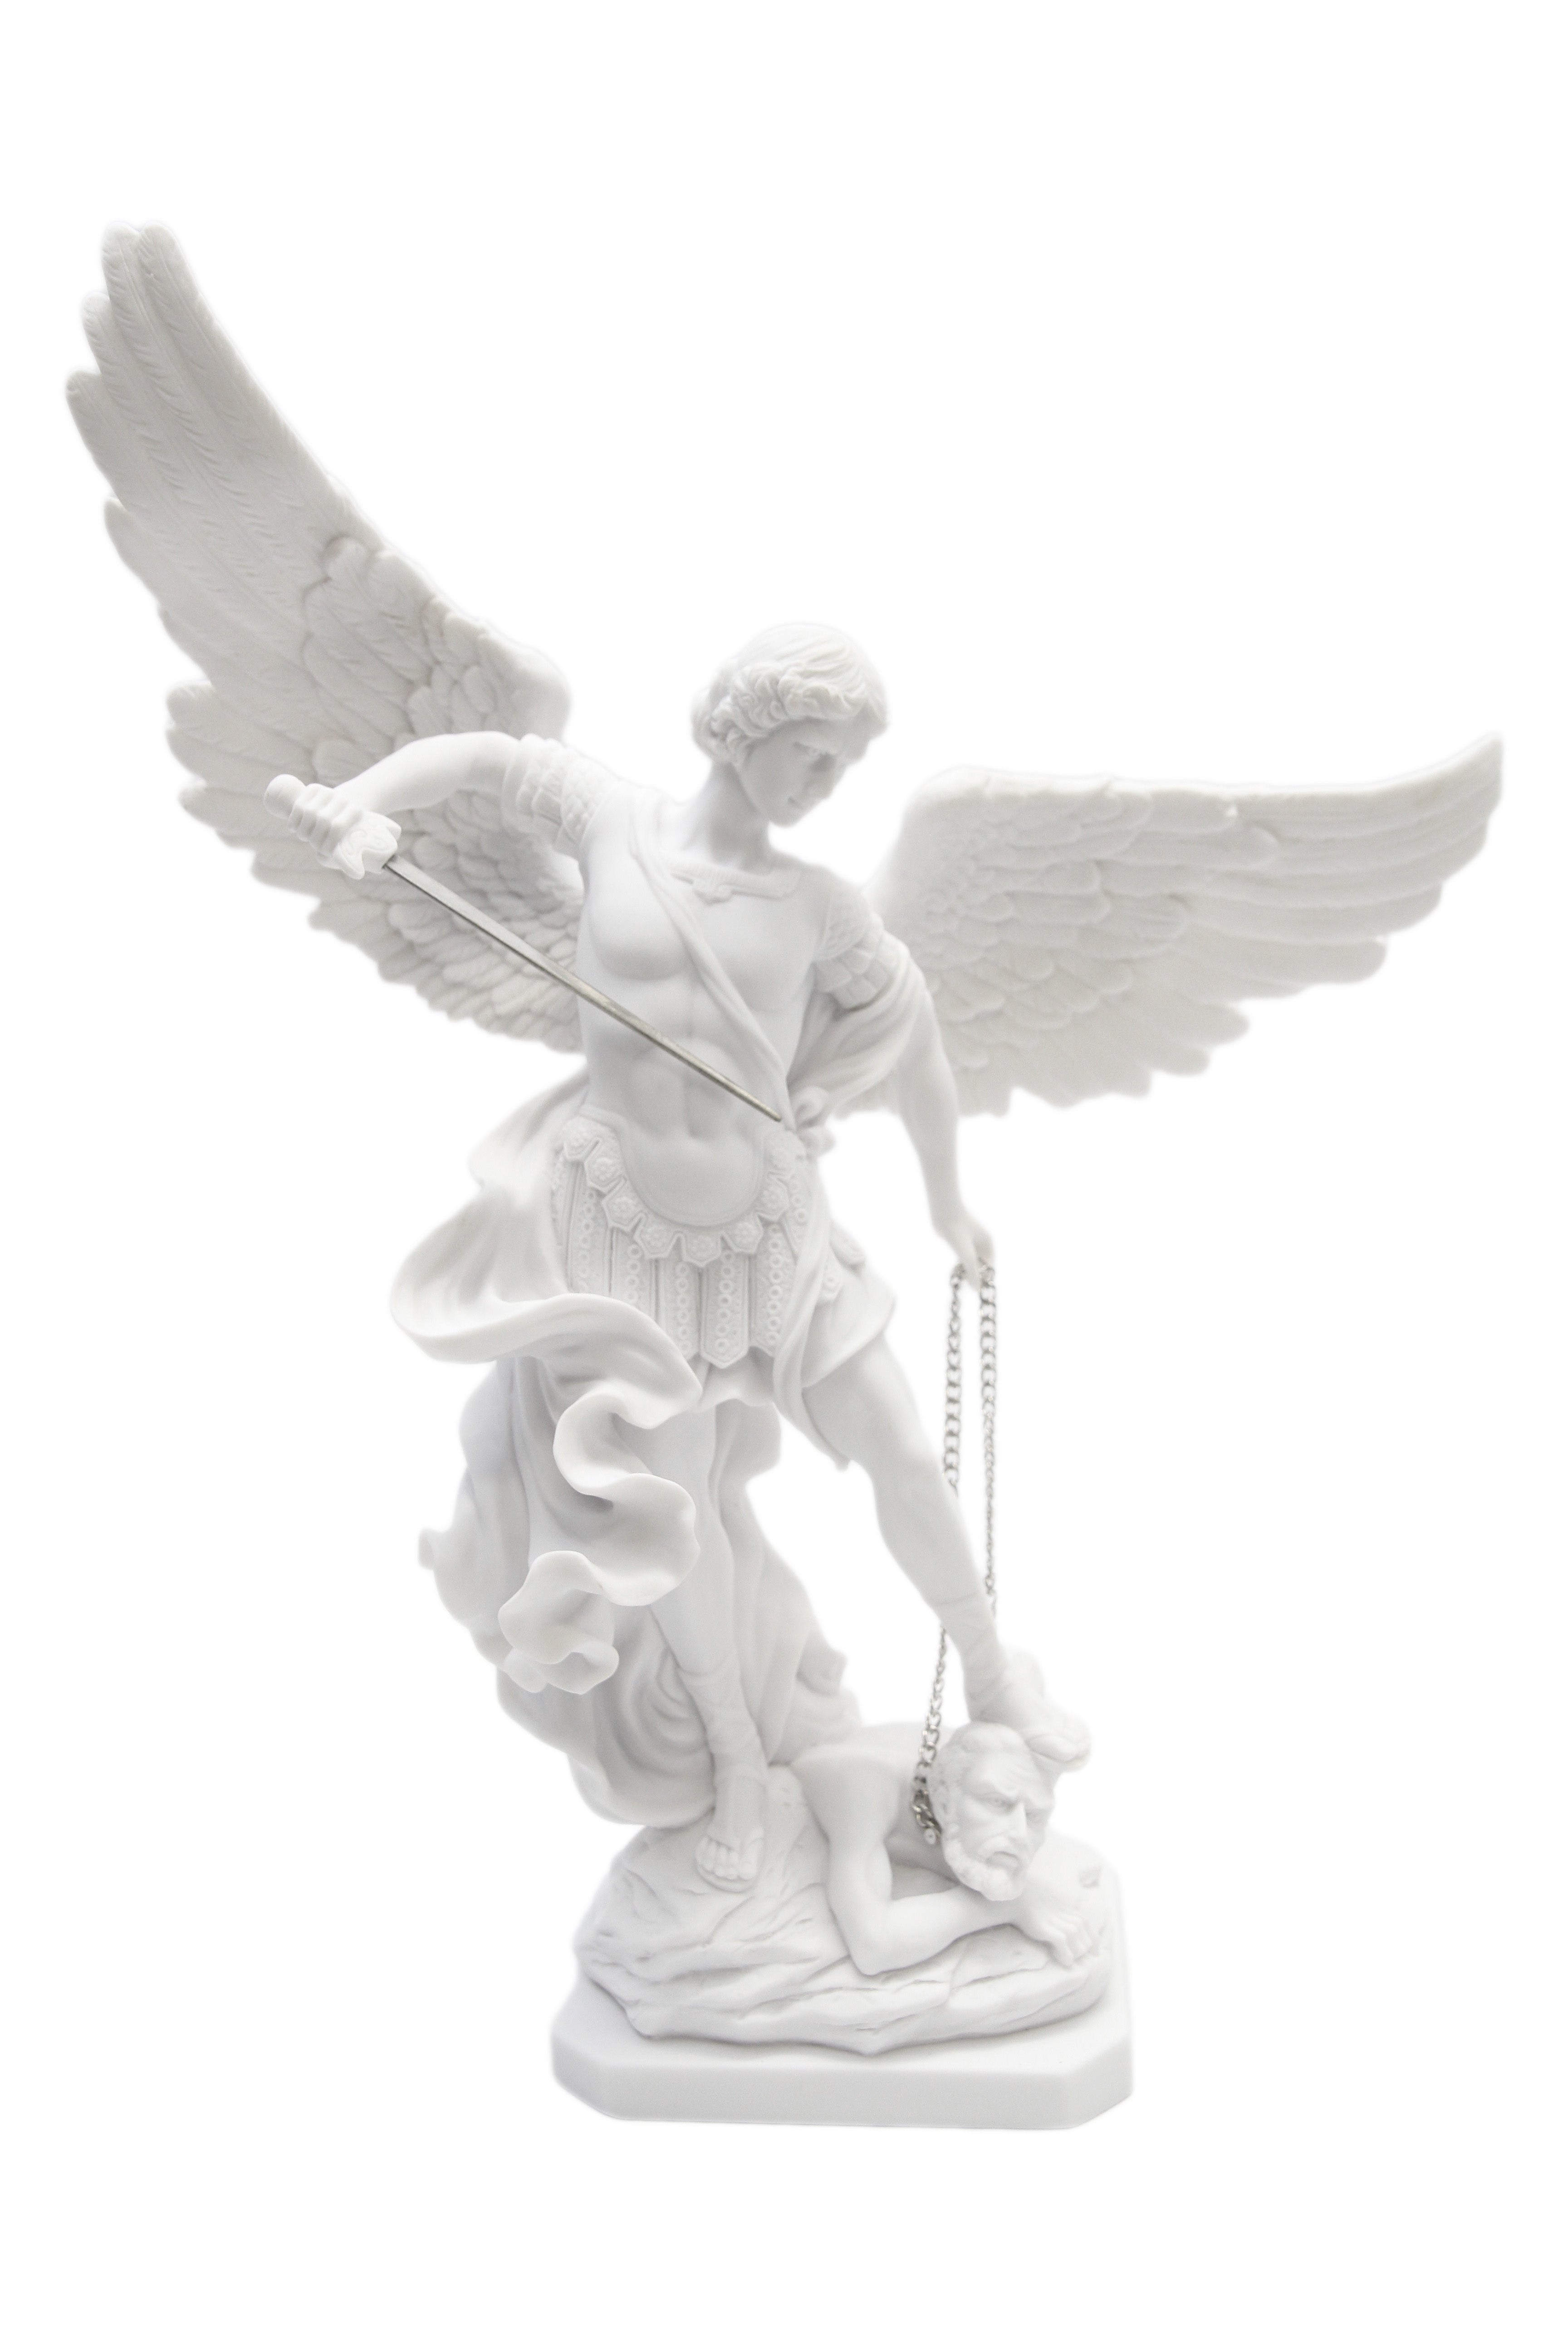 19.25 Inch Saint Michael Archangel Statue Catholic Angel Vittoria Collection Made in Italy Religious